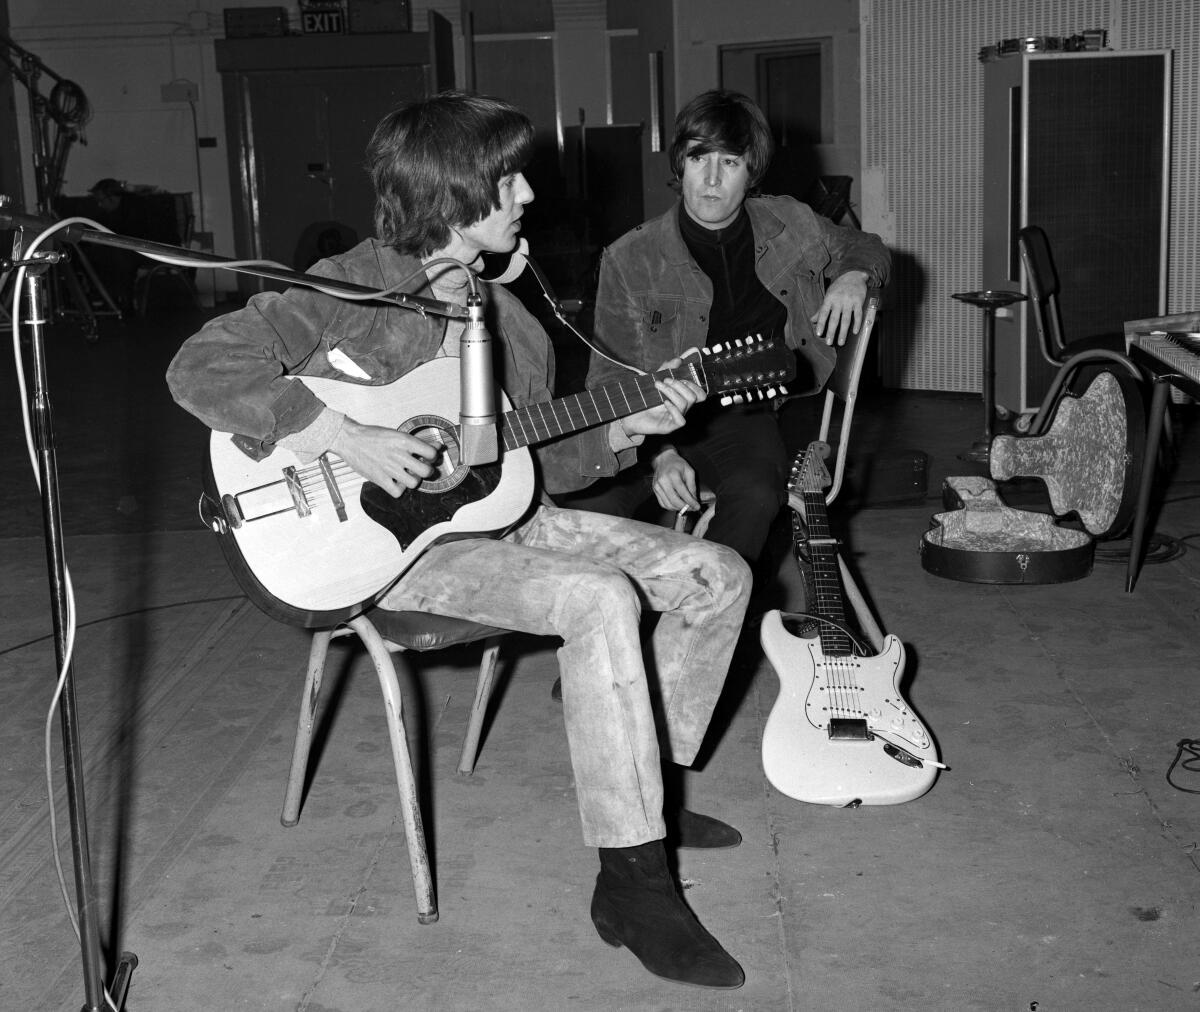 A young man with a shaggy hairstyle sitting and playing a guitar while another man watches with a guitar leaning on his chair